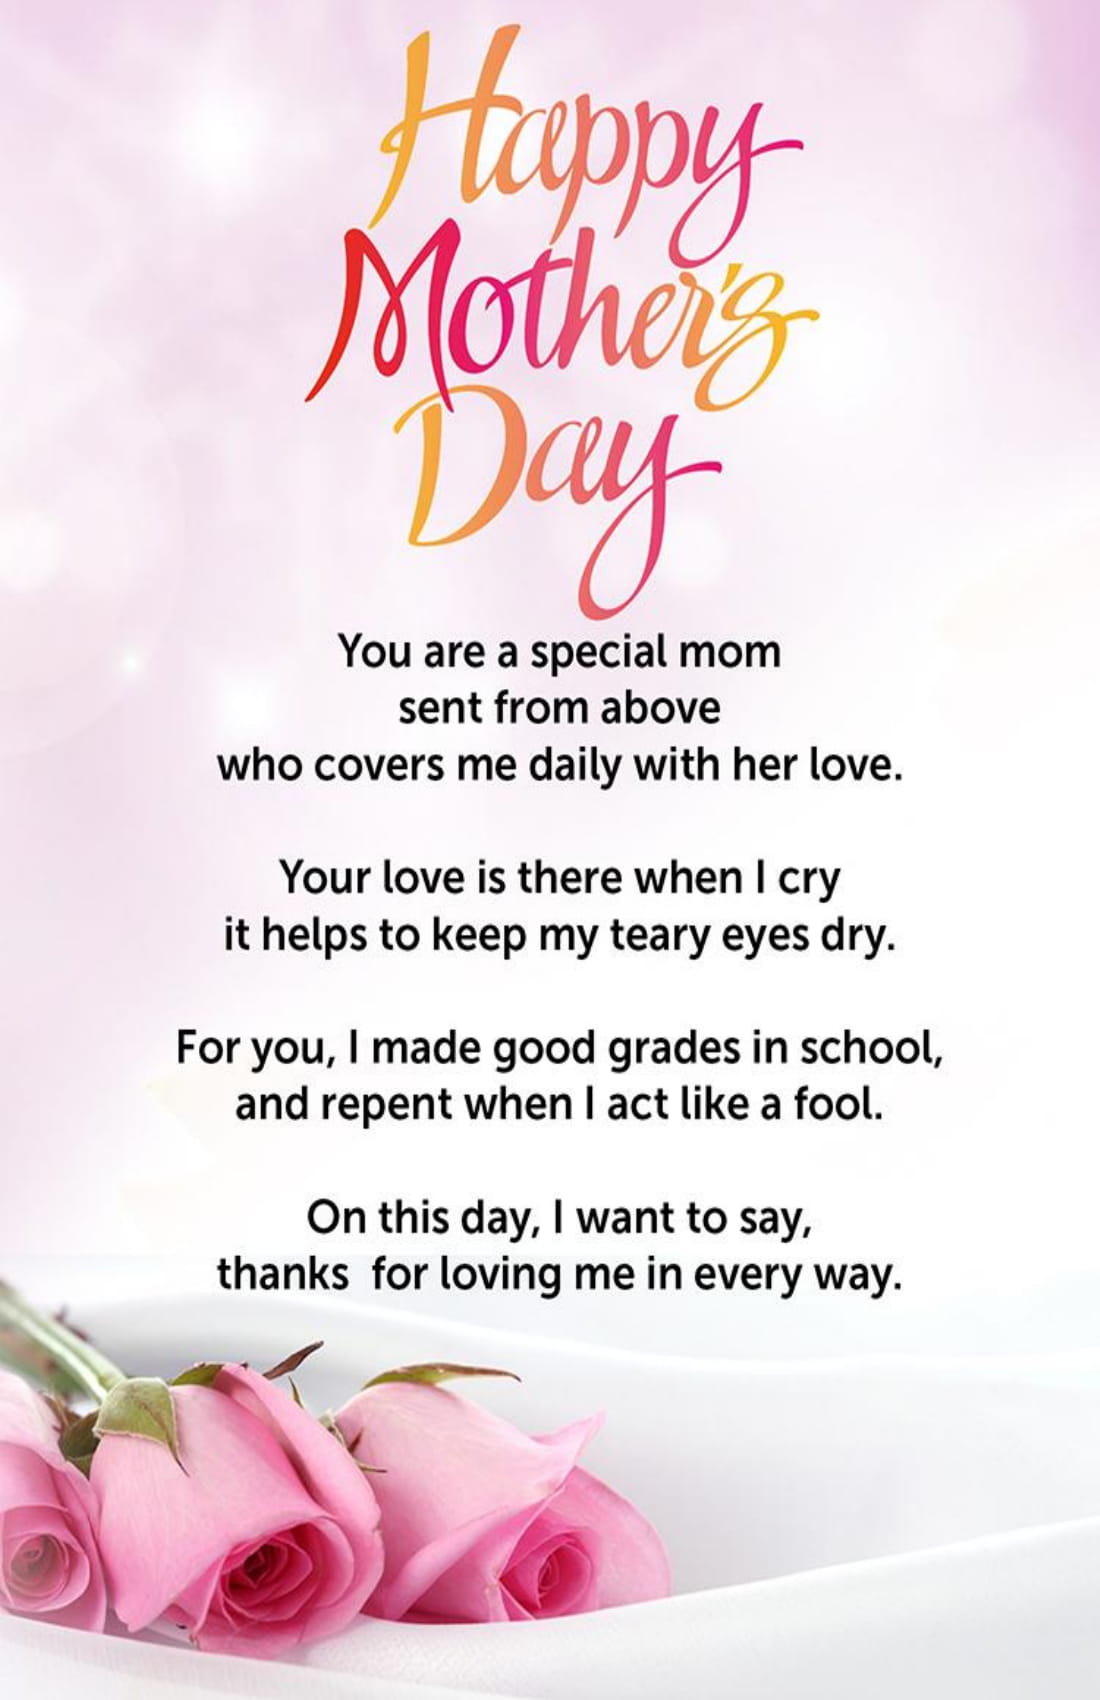 Is mothers when day happy Mother’s Day